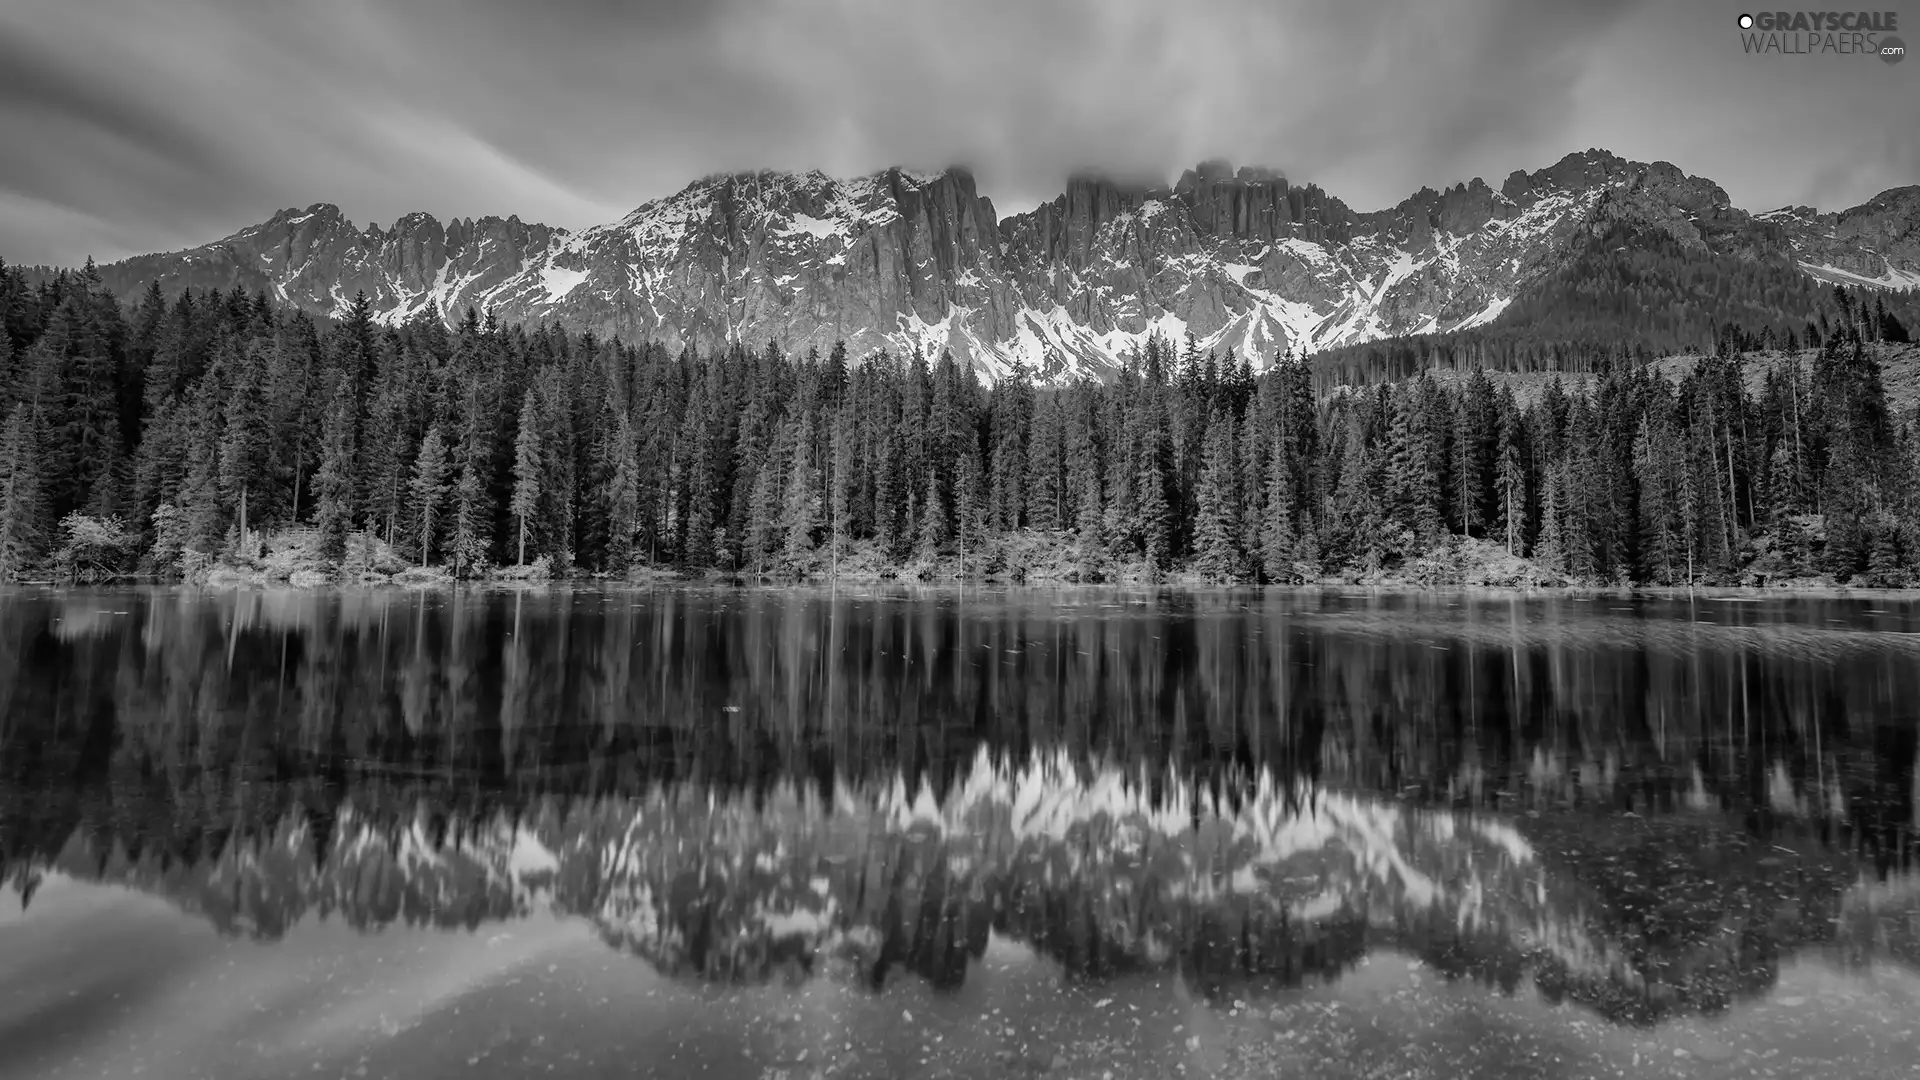 Alps, lake, forest, Dolomites, viewes, Italy, South Tyrol, Mountains, Lago di Carezza, reflection, trees